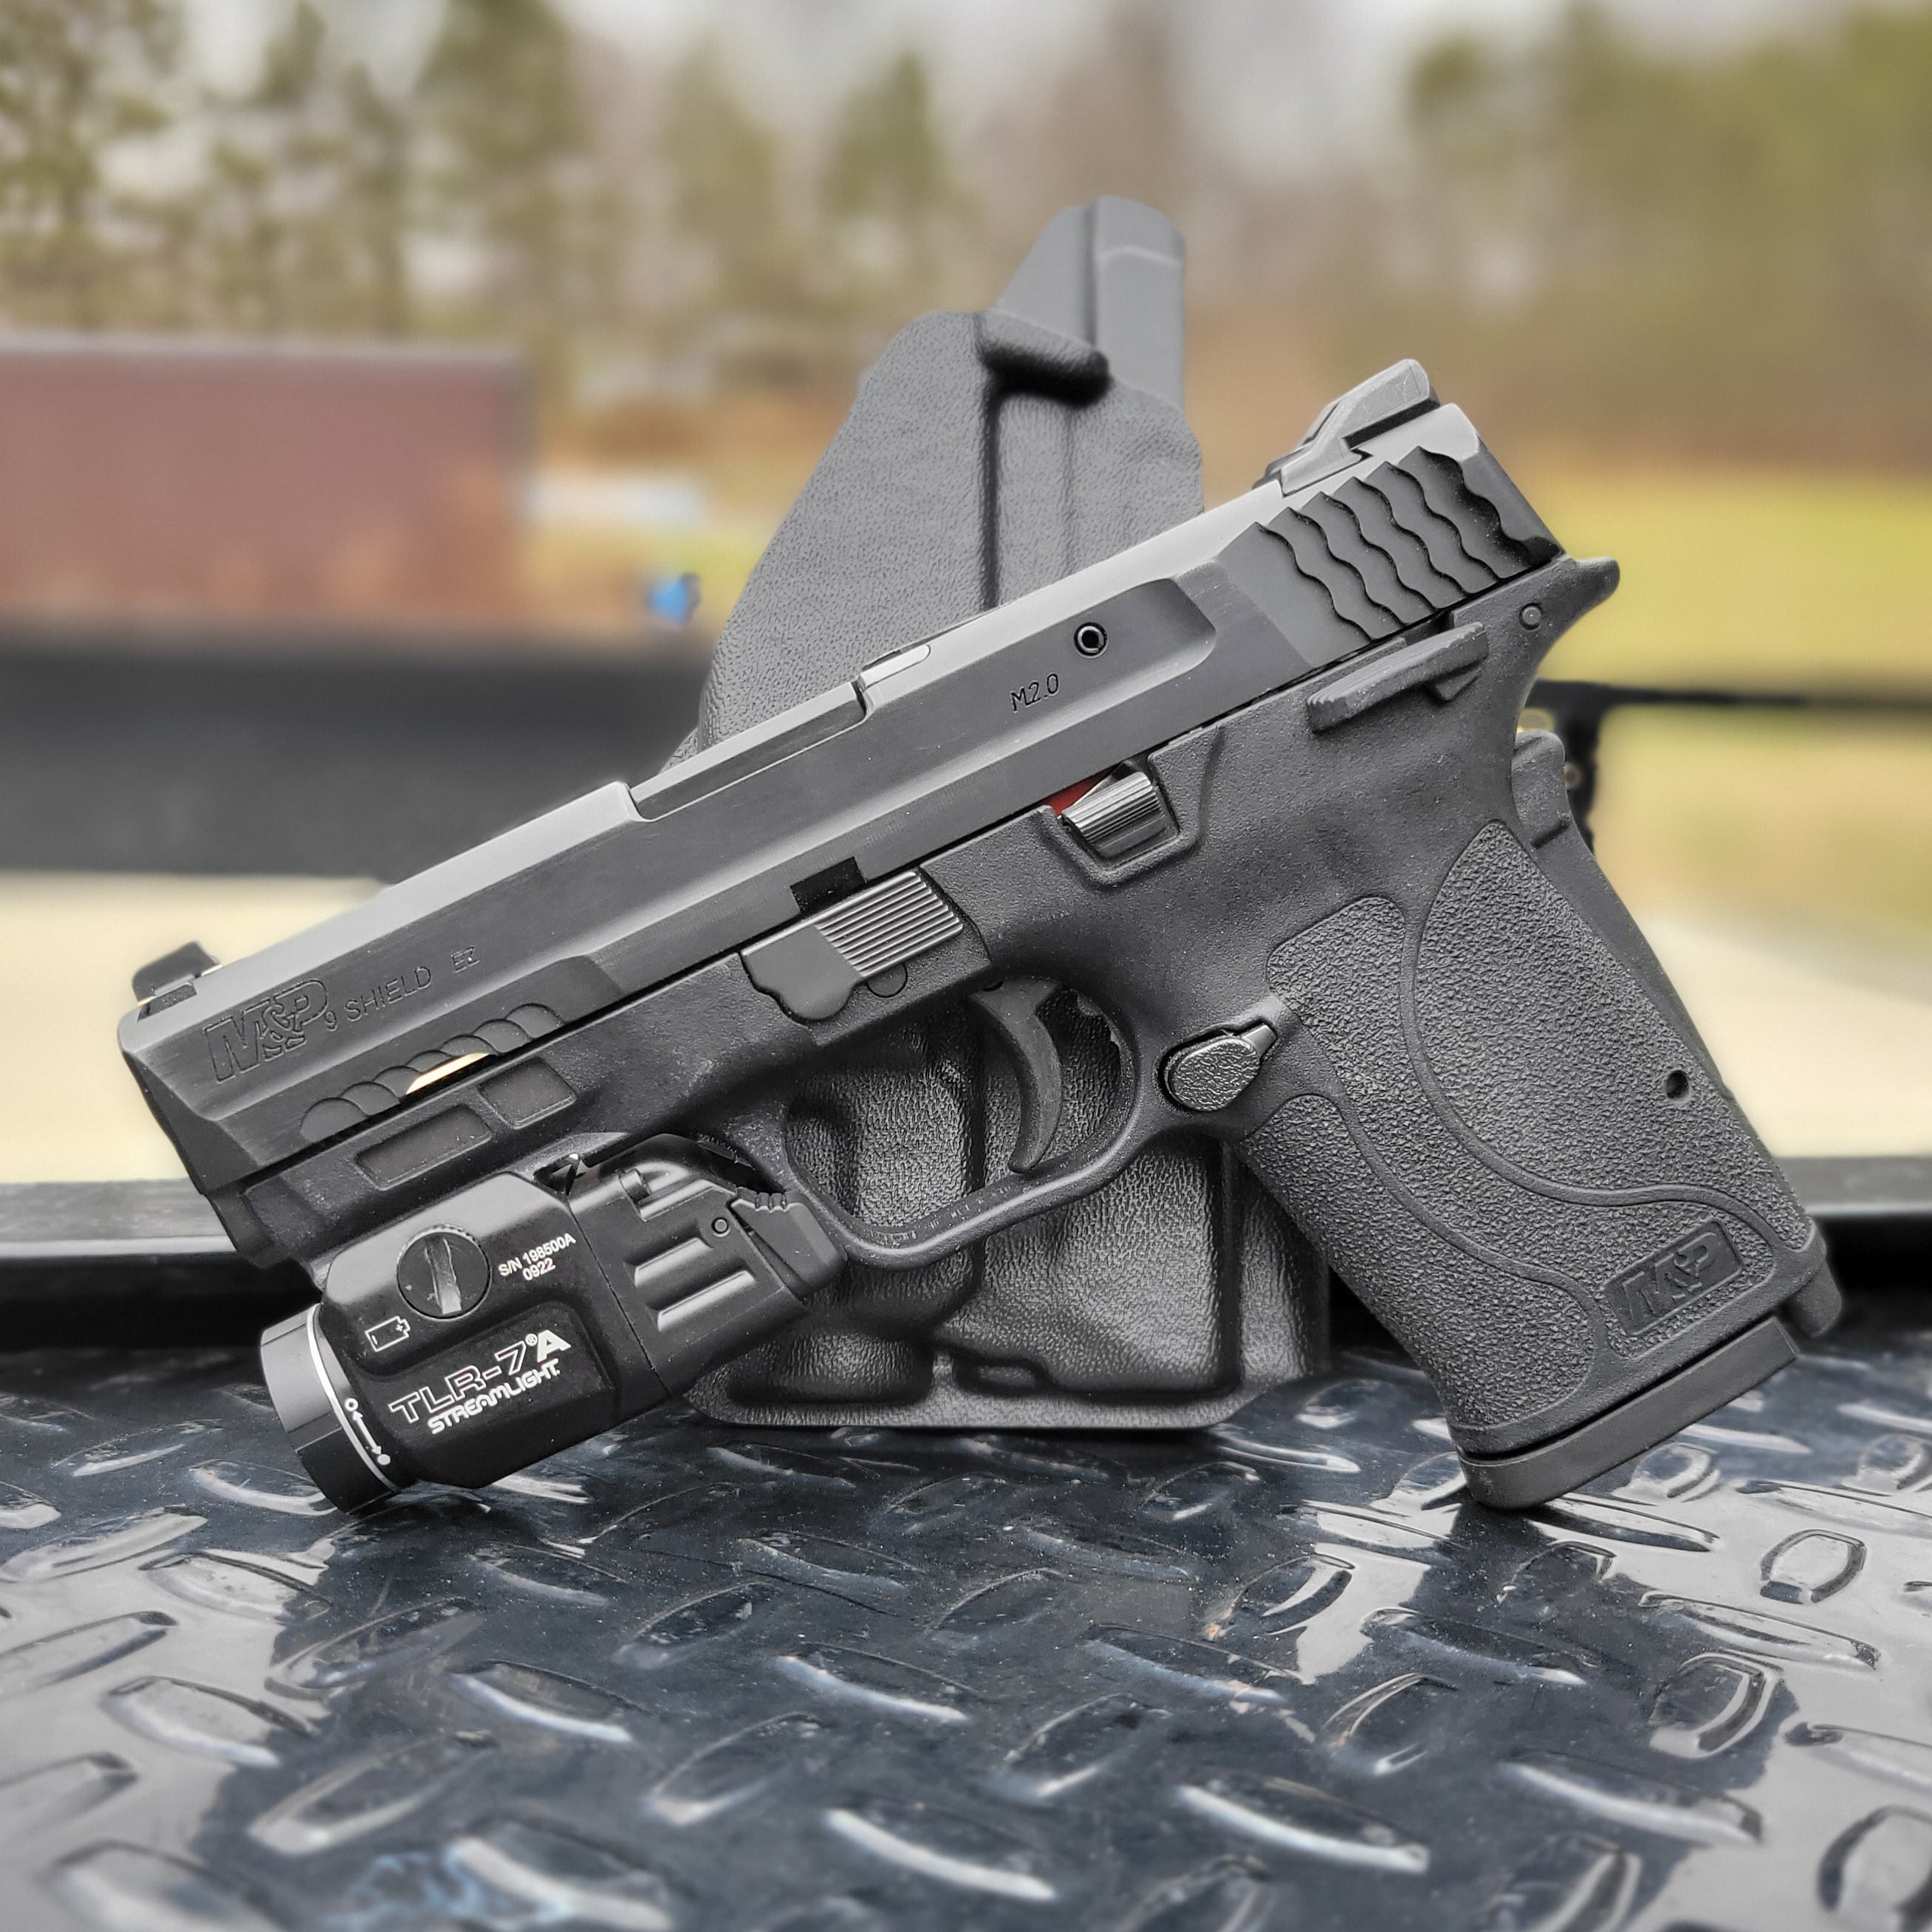 For the best Outside Waistband Kydex holster designed to fit the Smith & Wesson M&P 9 Shield EZ with Streamlight TLR-7 or TLR-7A weapon-mounted light, shop 4Bros. Full Sweat guard Adjustable Retention minimal material and smooth edges to reduce printing Thermoplastic Kydex for durability 9EZ EZ9 S&W Easy 9